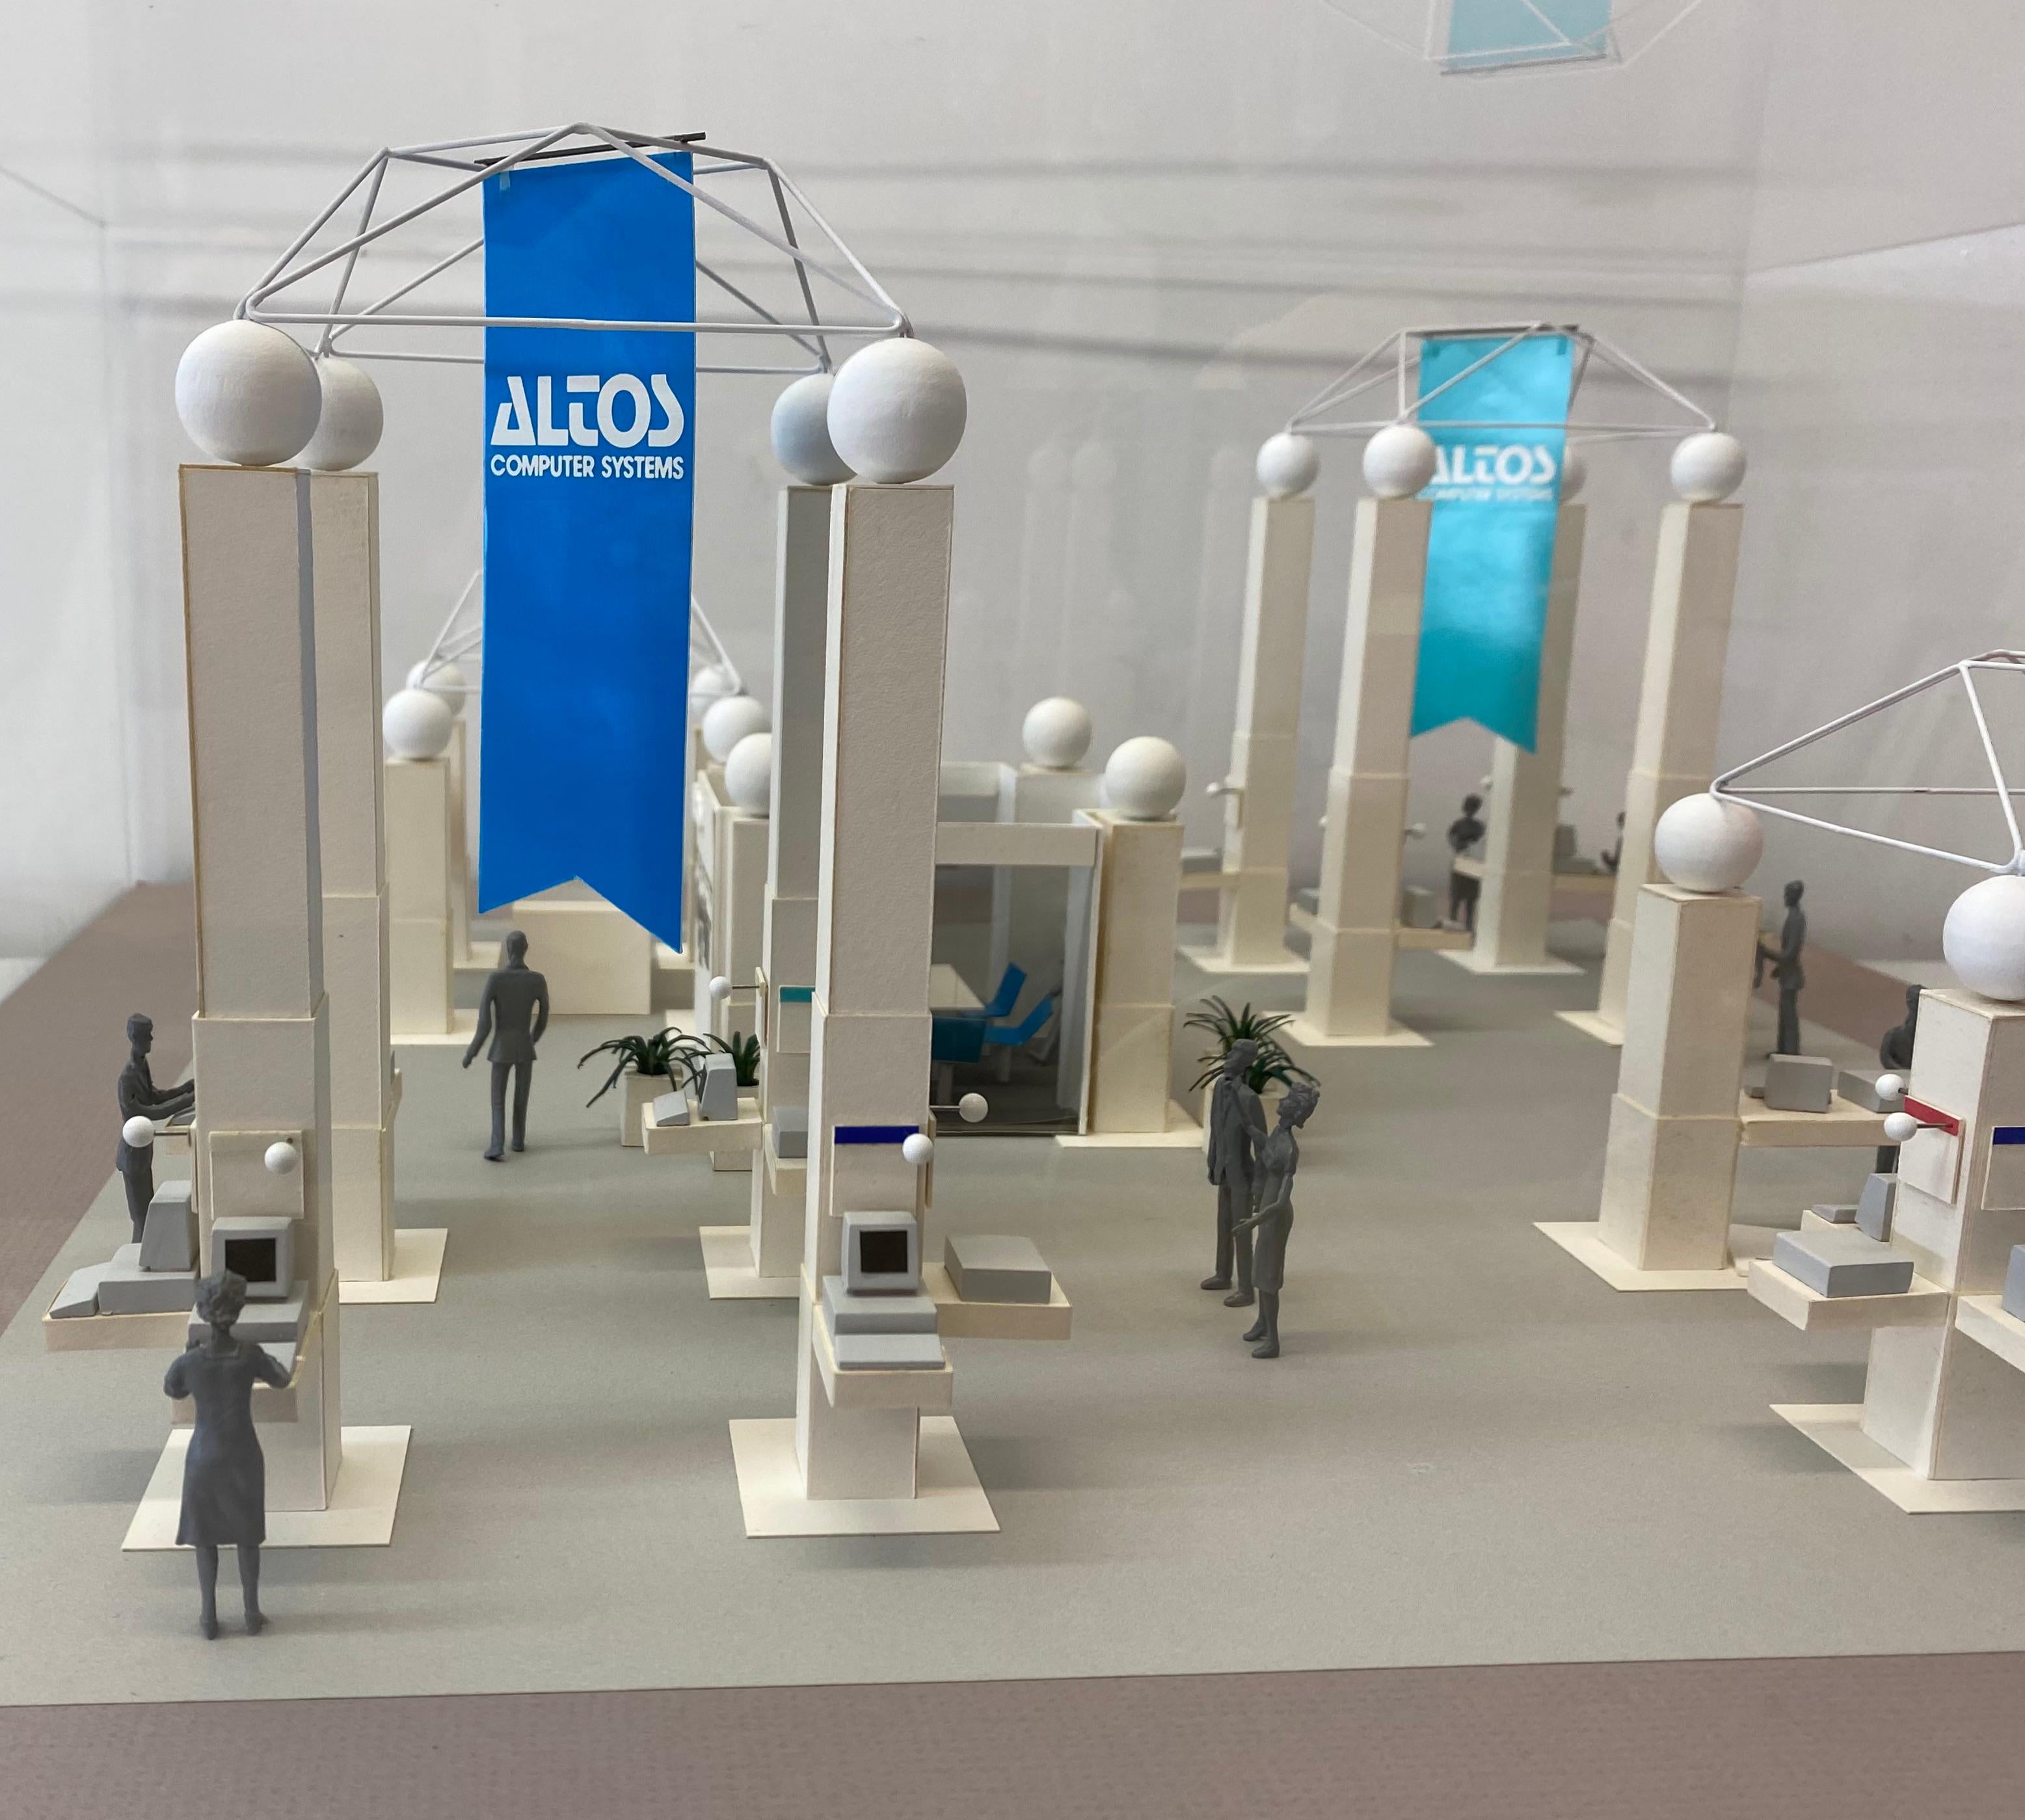 Post-Modern Altos Computer Systems Trade Show Architecture Model C.1980s